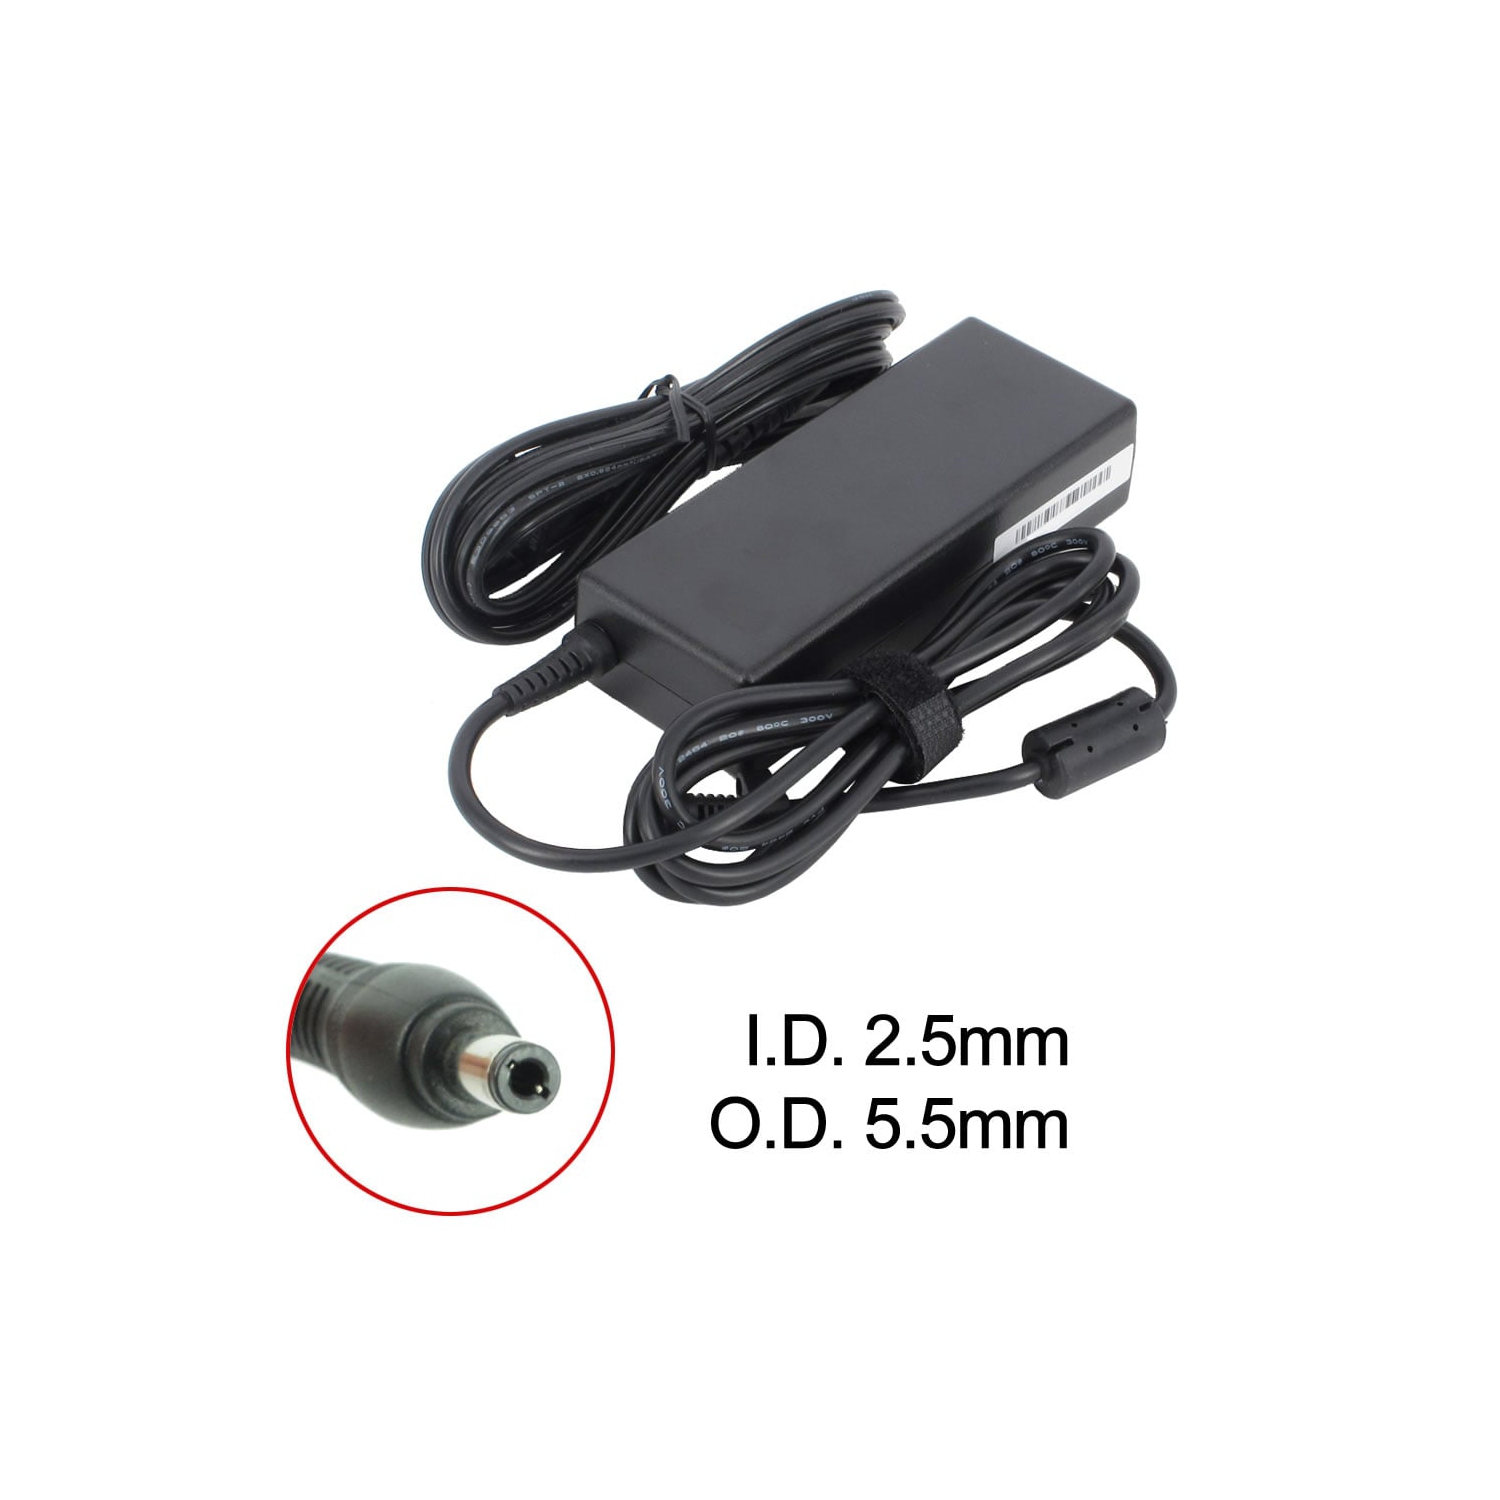 BATTDEPOT New Laptop AC Adapter for Asus X55S 04G266006220 2525534 90-N6APW2010 ADP-60ZH PA-1900-05W PX5035E-1PWR